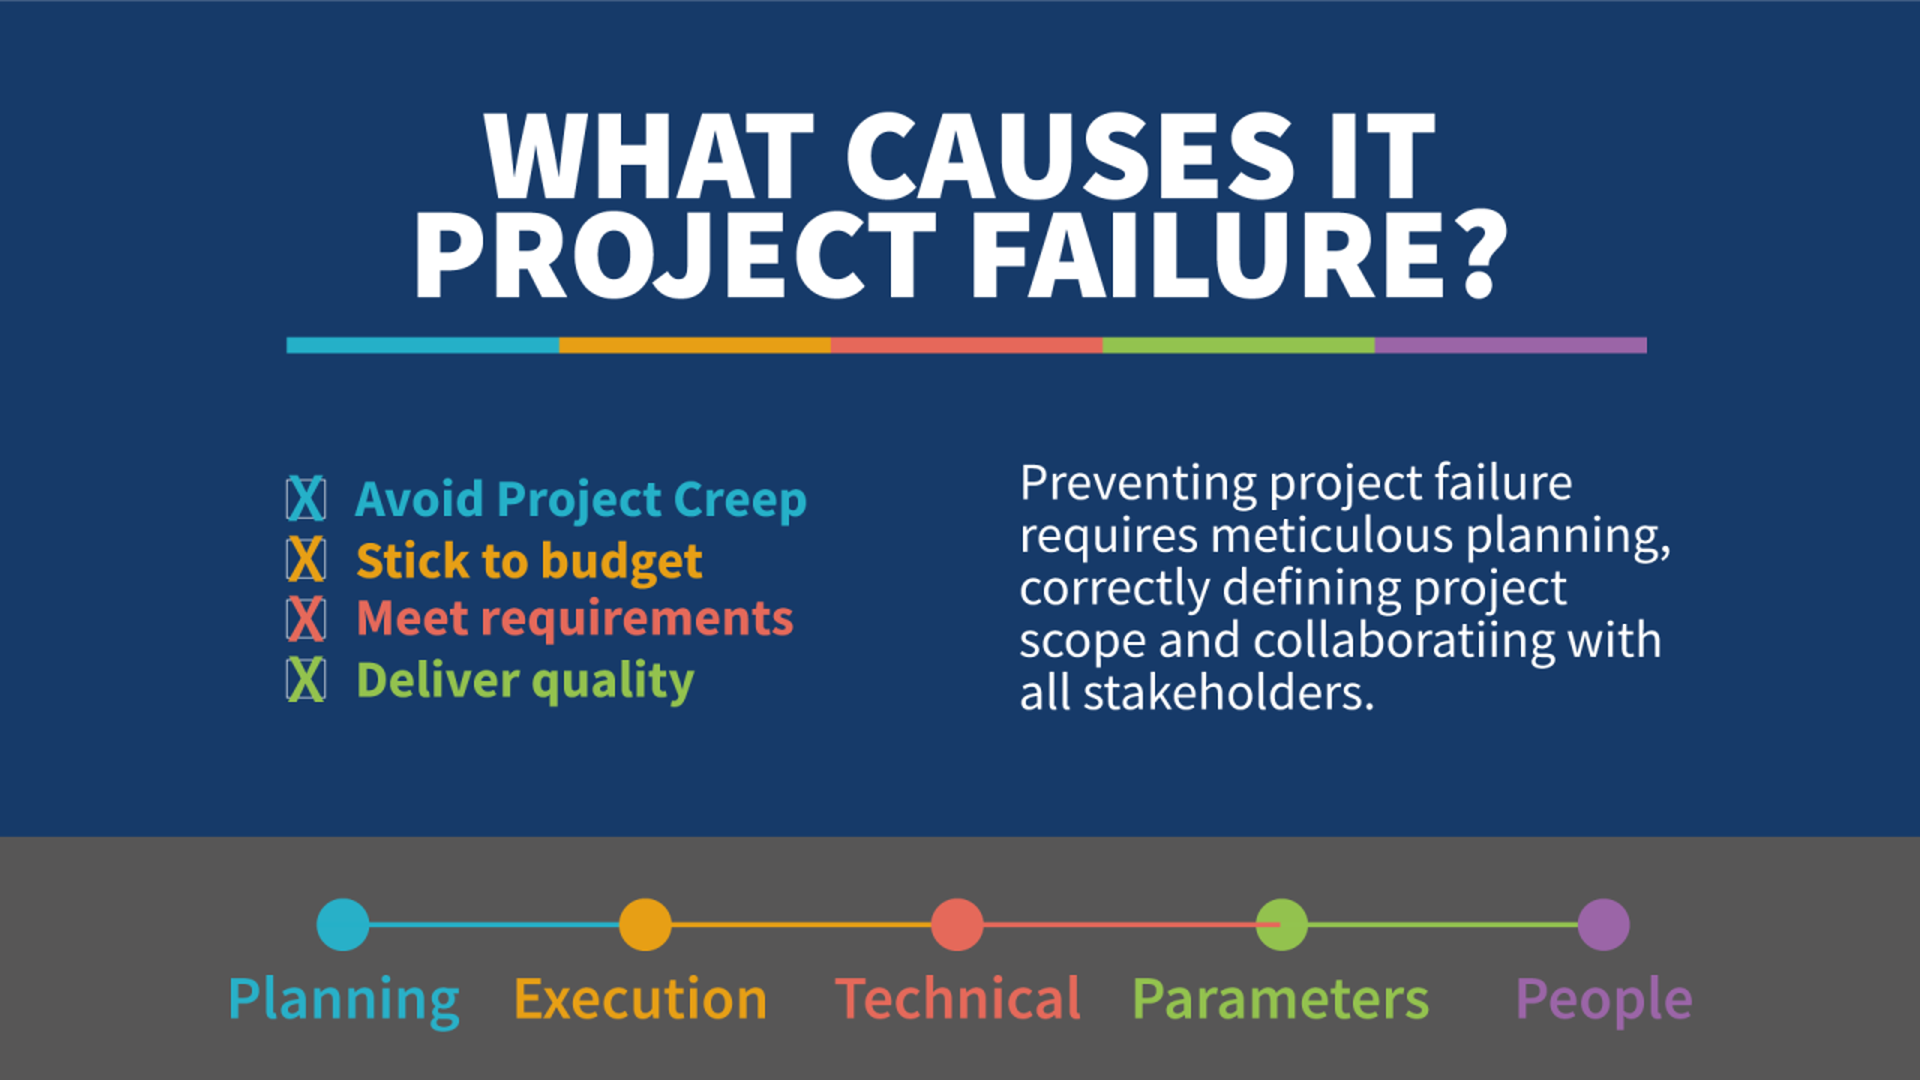 Infographic: What causes IT Project Failure?